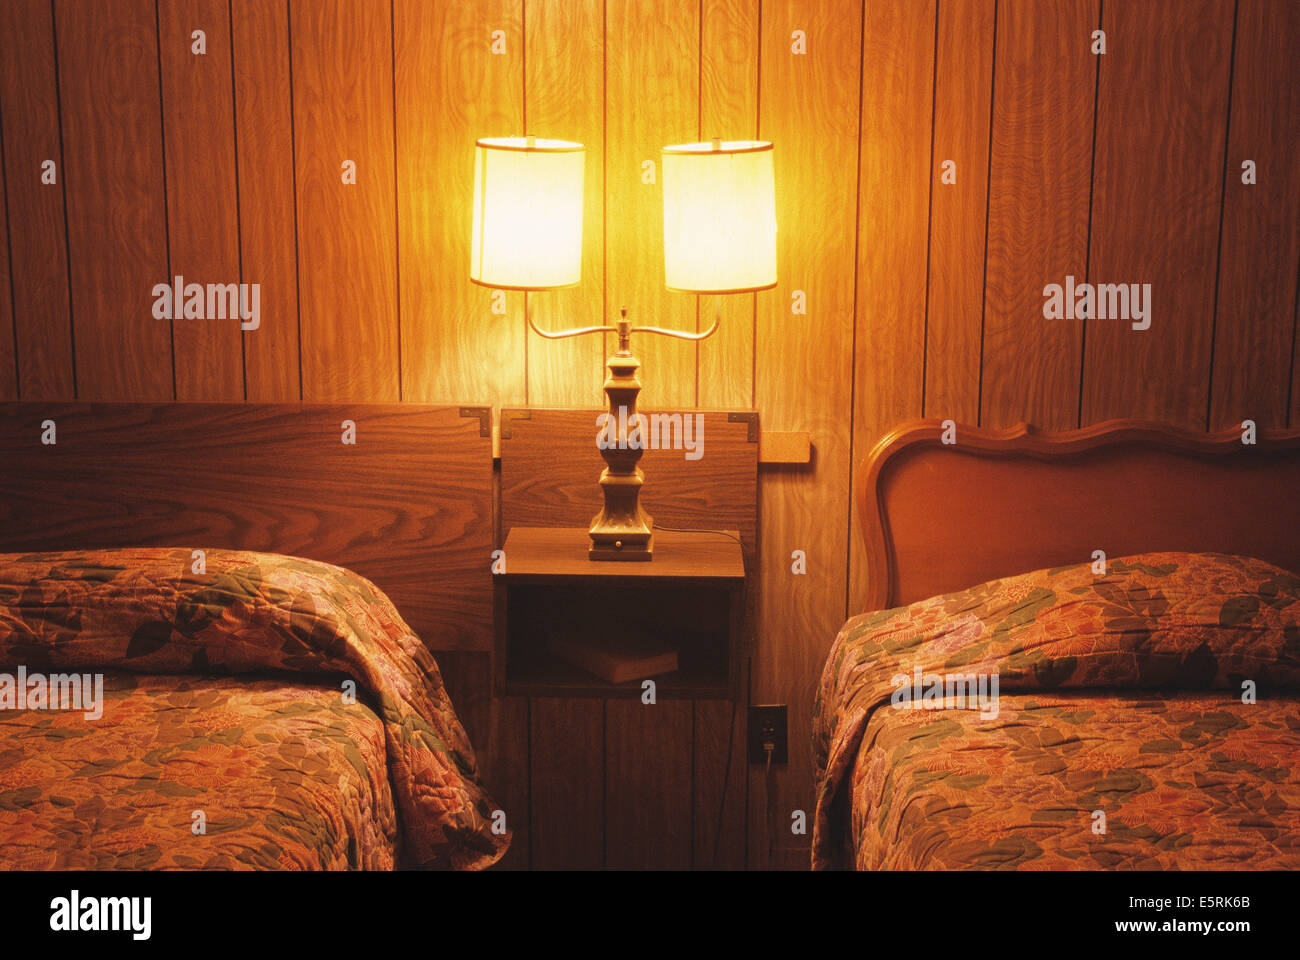 Motel room interior with two beds and nightstand Stock Photo